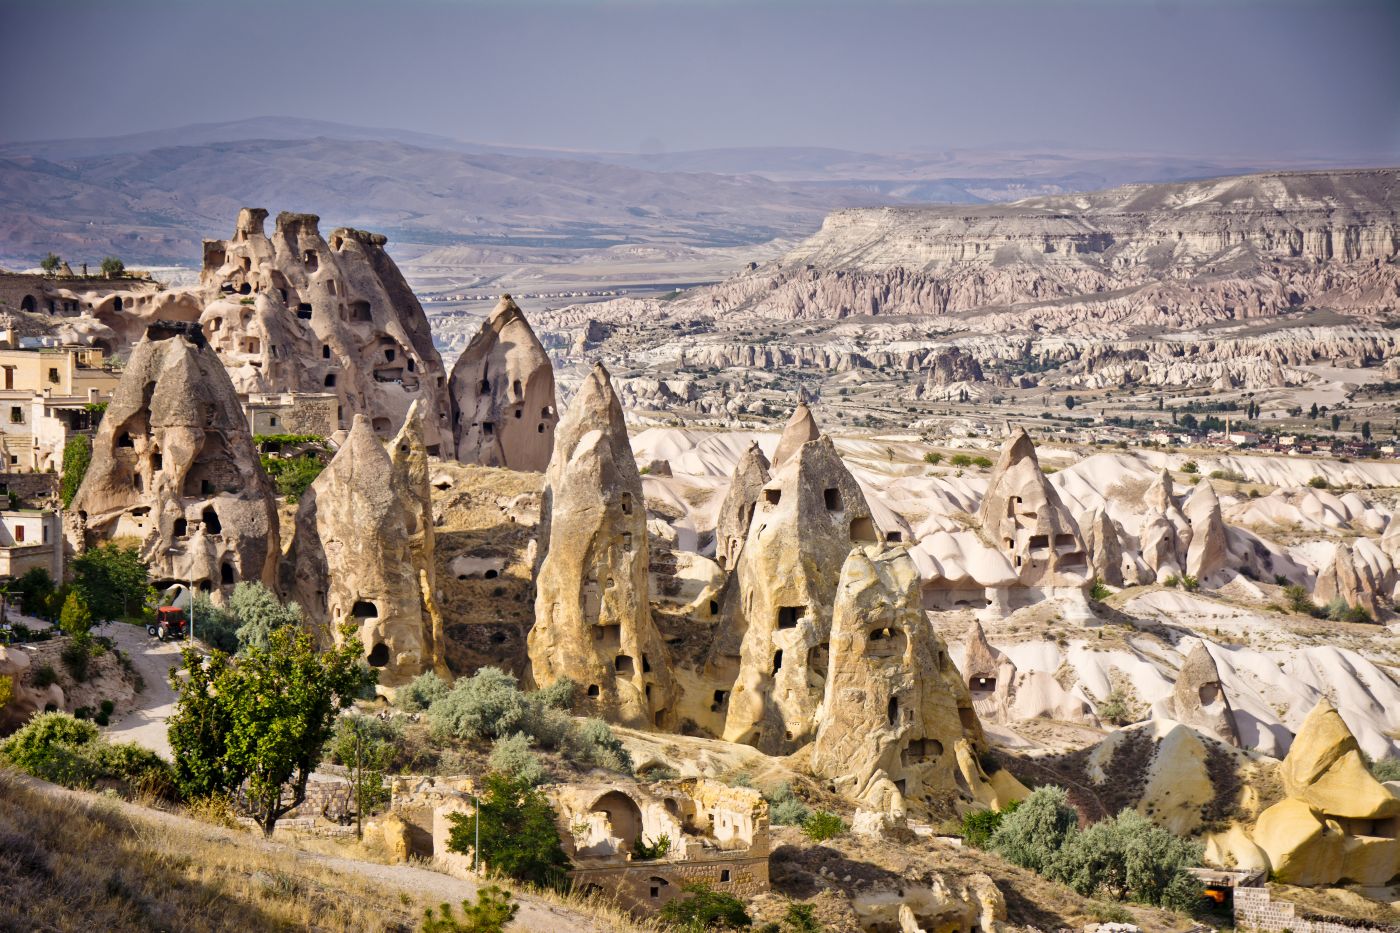 An arial view of the rocky Capadoccia desert in Turkey